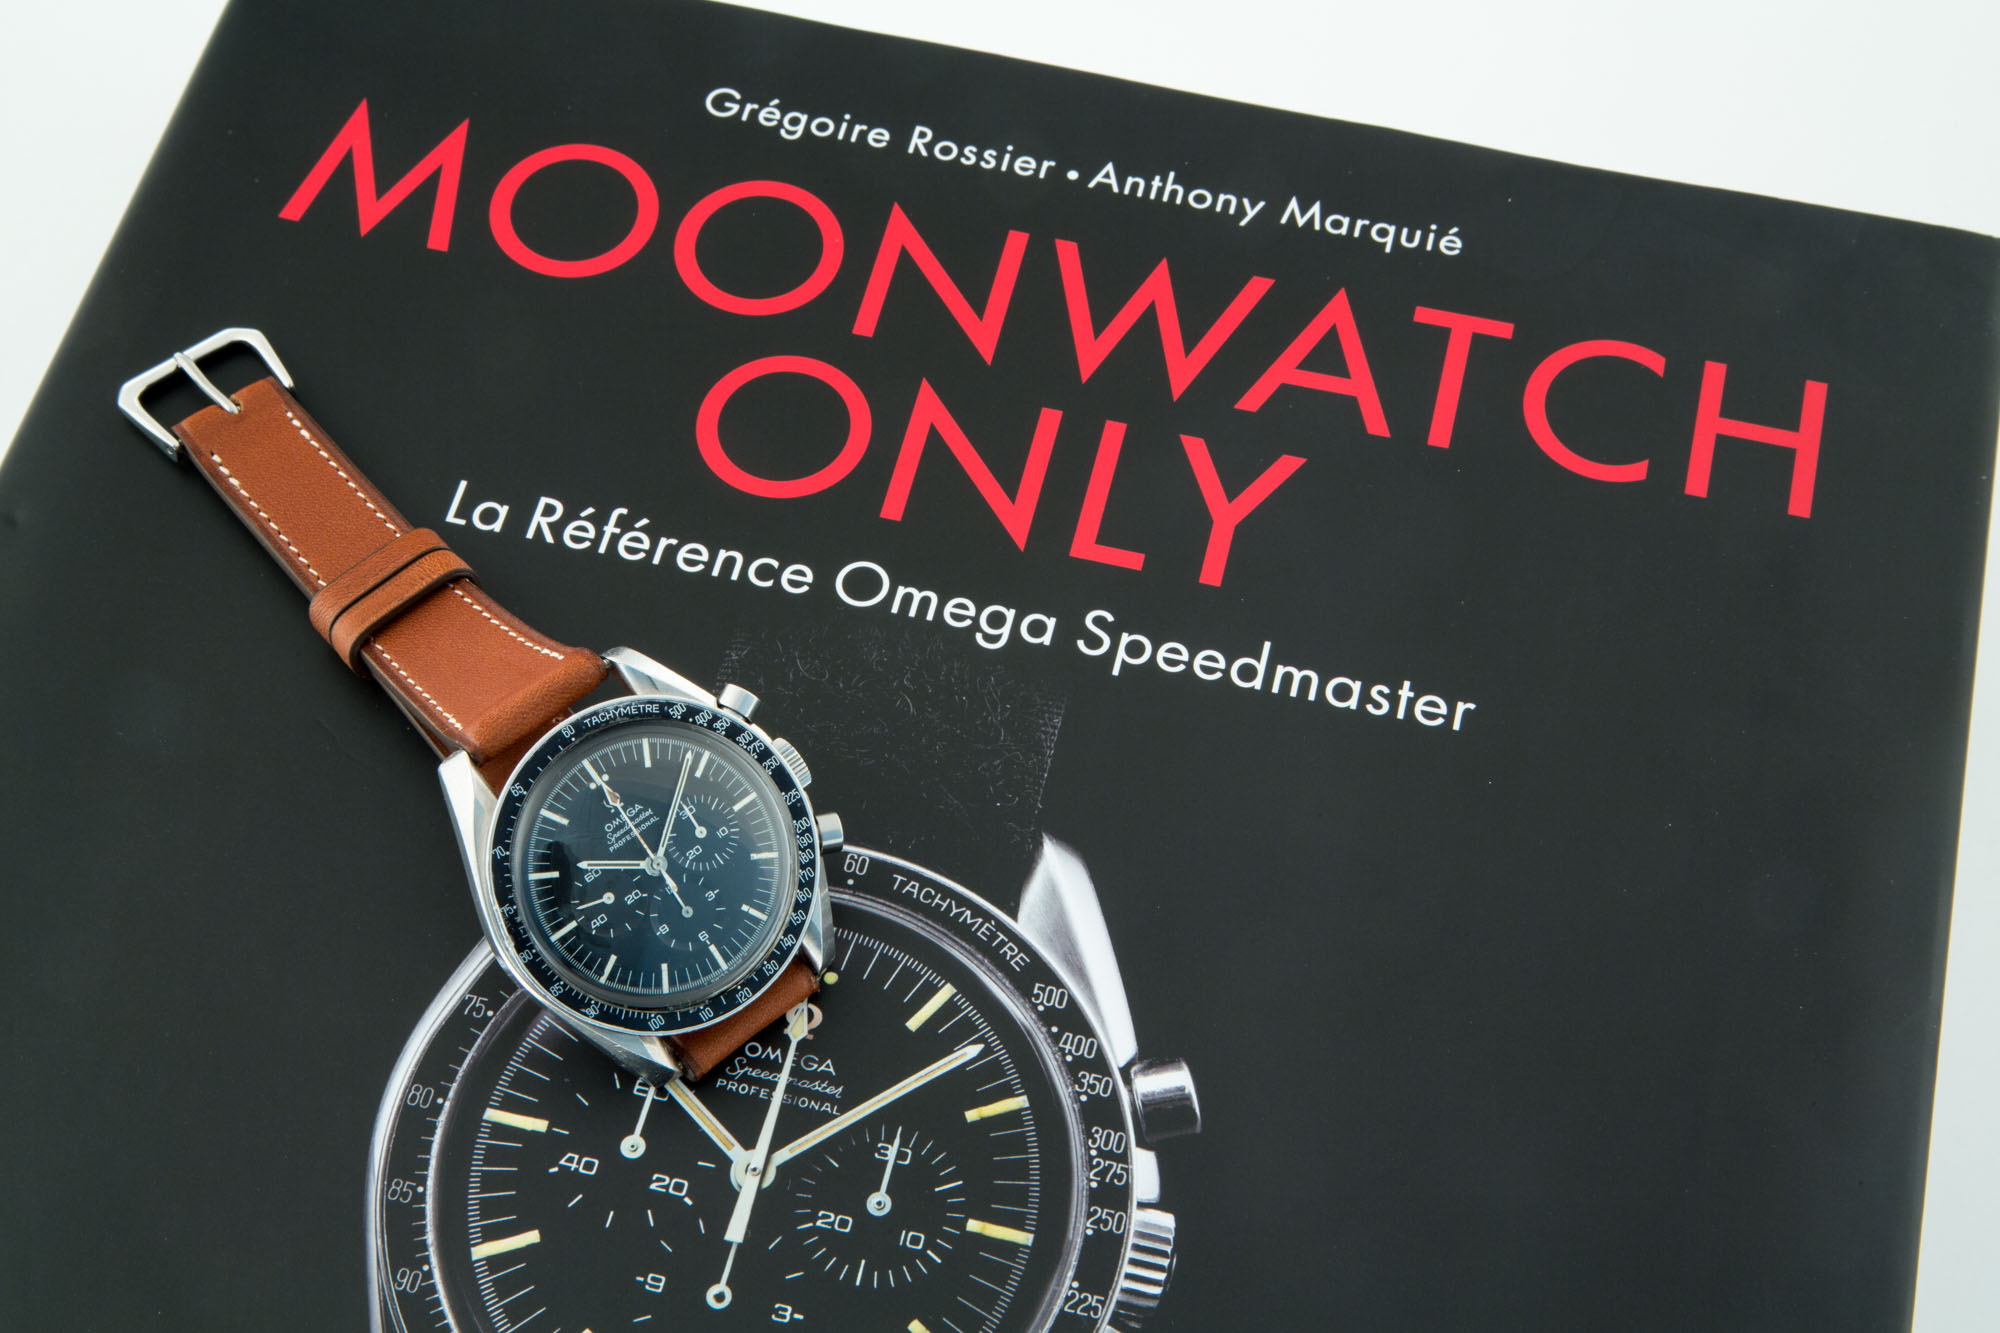 Moonwatch only